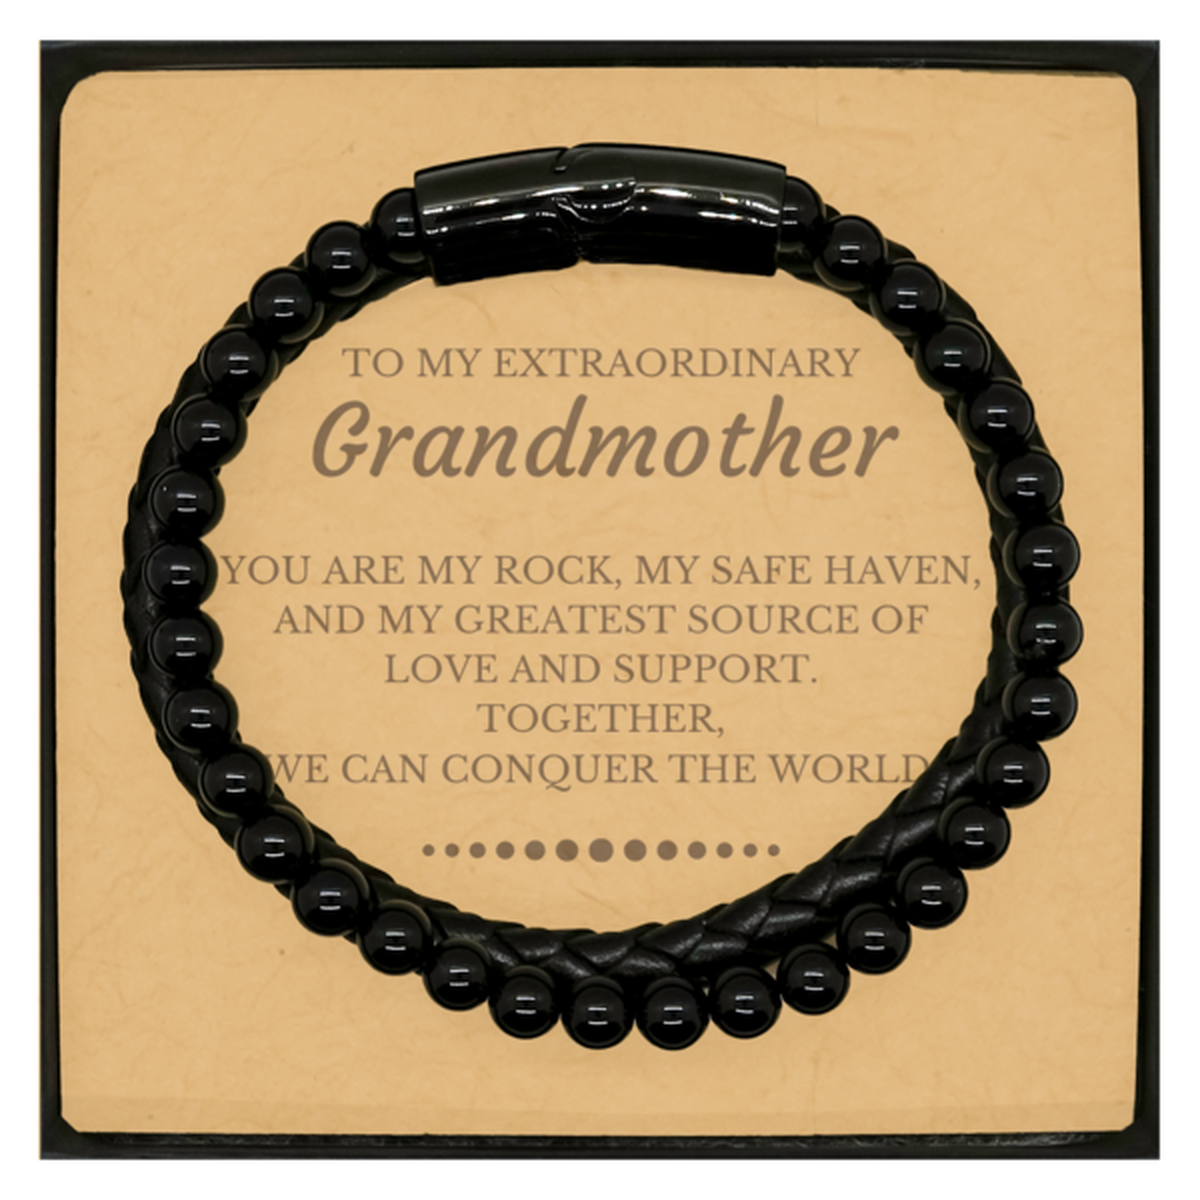 To My Extraordinary Grandmother Gifts, Together, we can conquer the world, Birthday Christmas Stone Leather Bracelets For Grandmother, Christmas Gifts For Grandmother